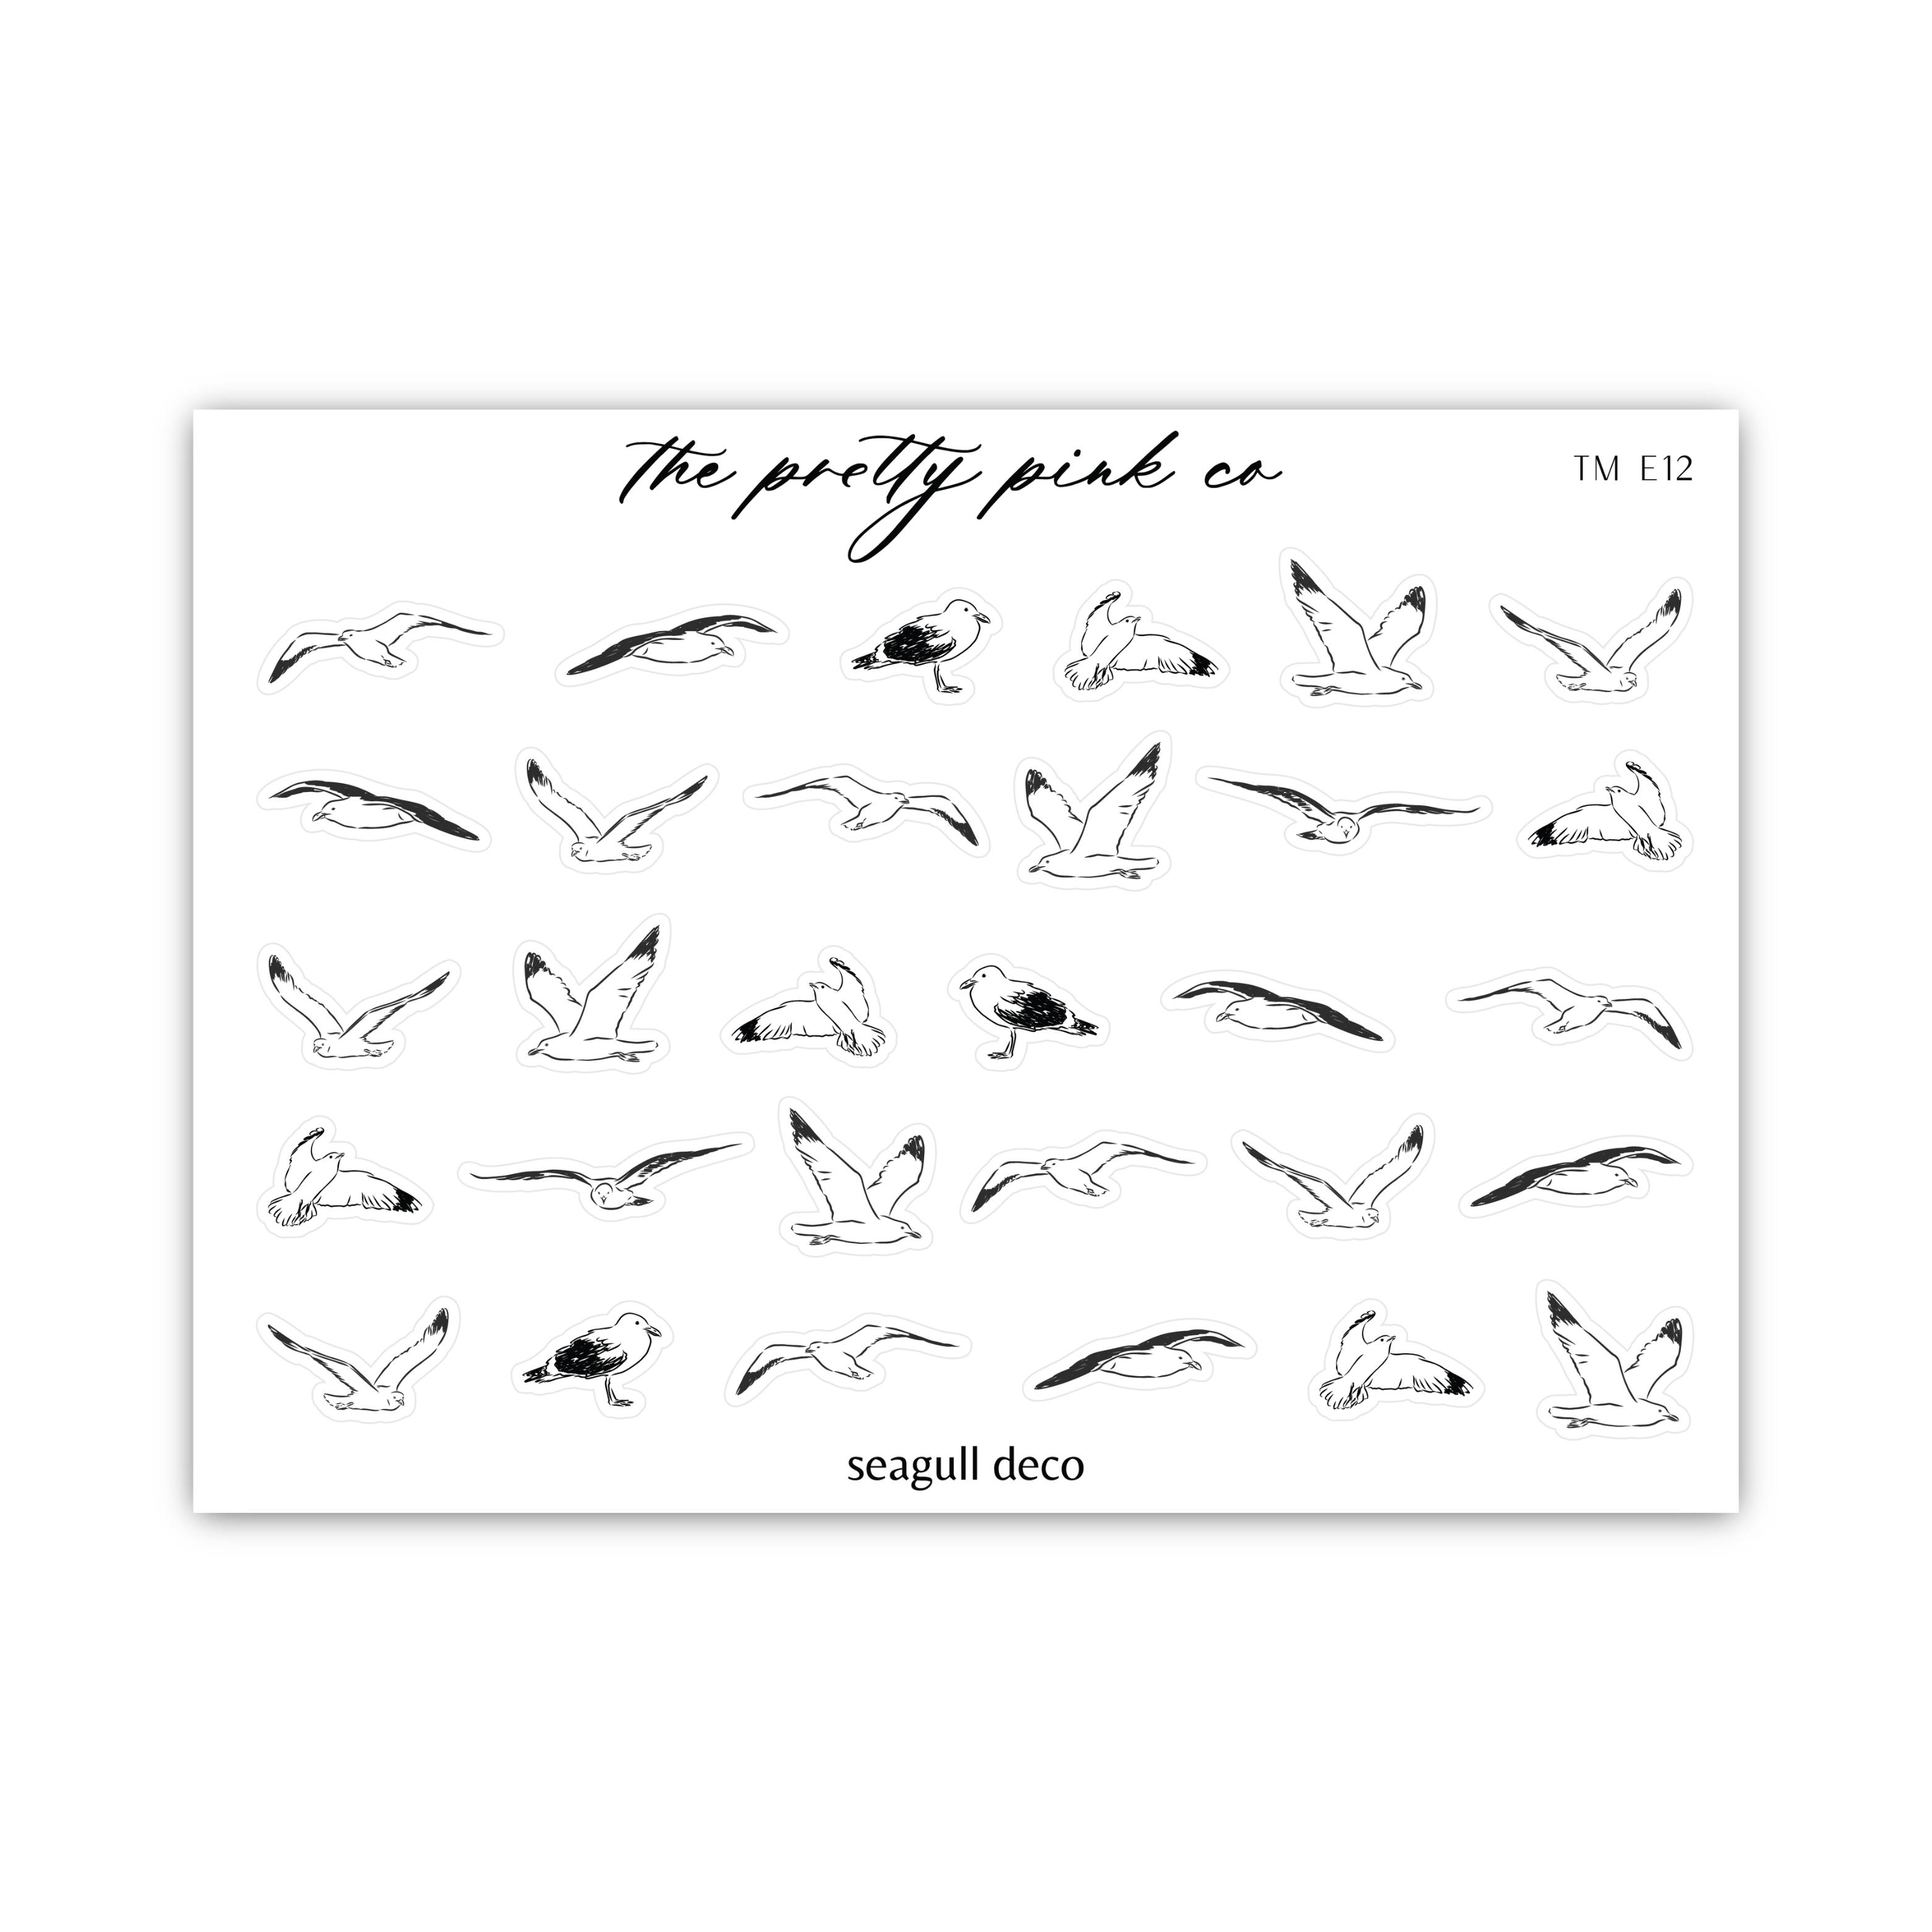 a black and white drawing of seagulls flying